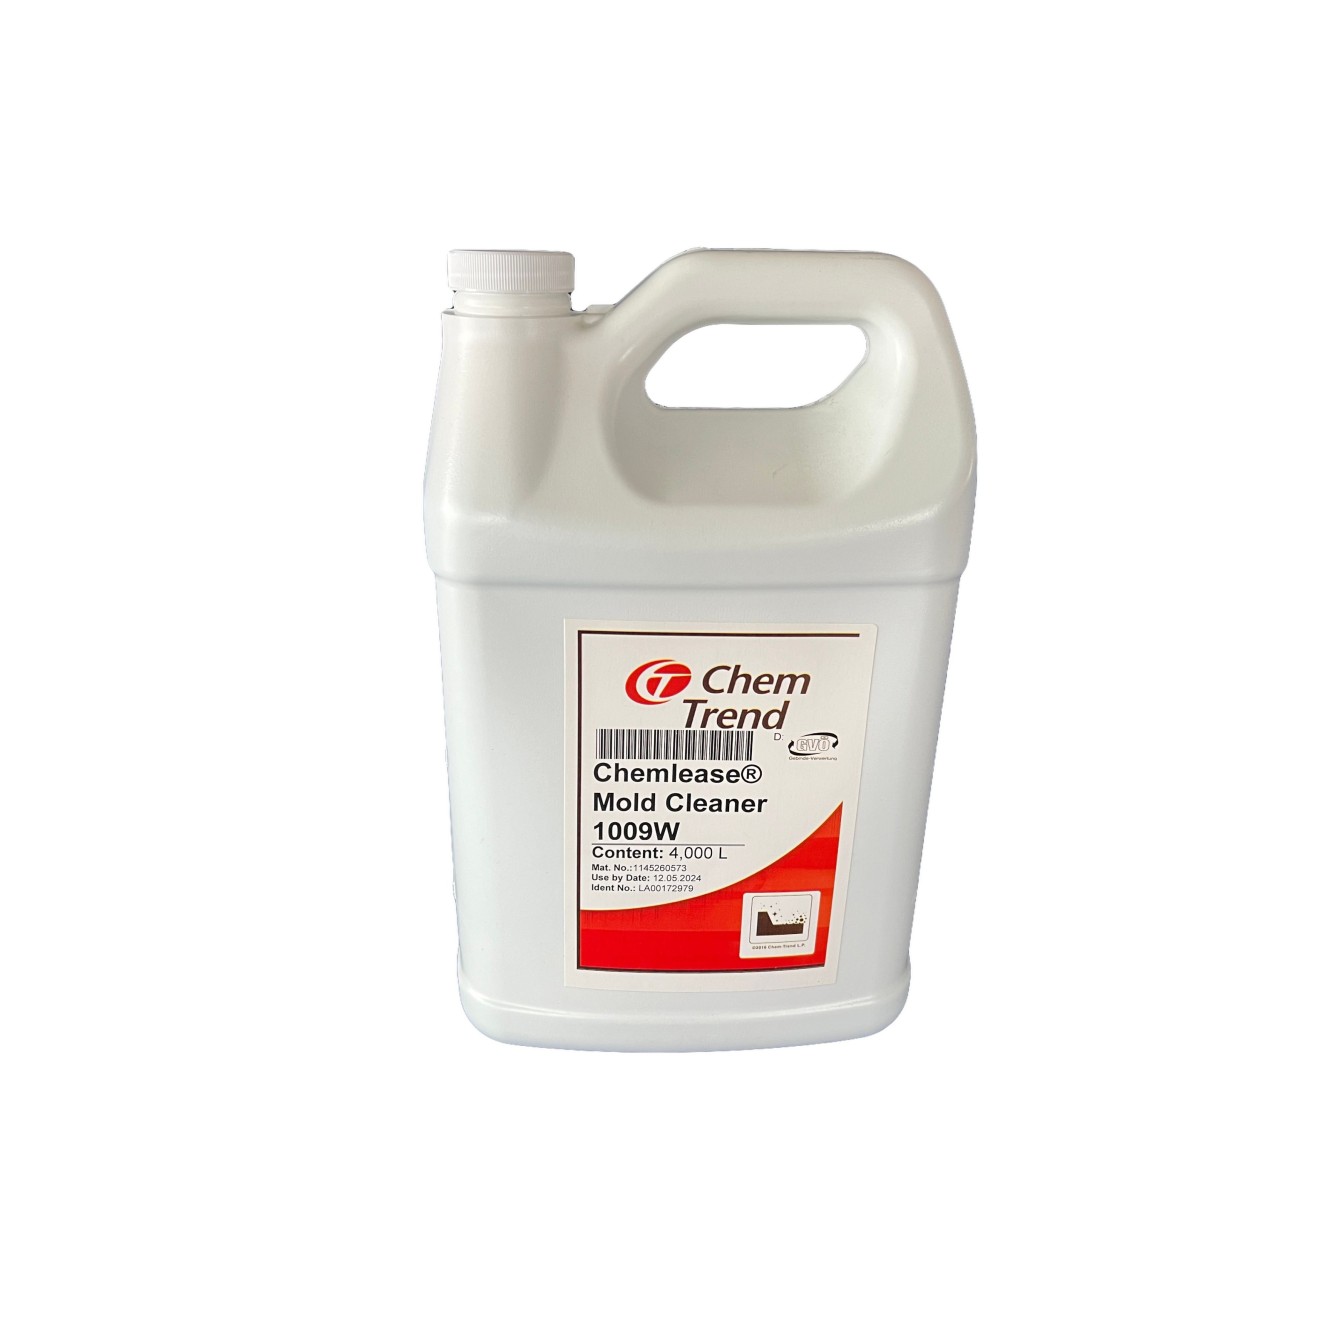 Chemlease Mold Cleaner 1009W [4L]